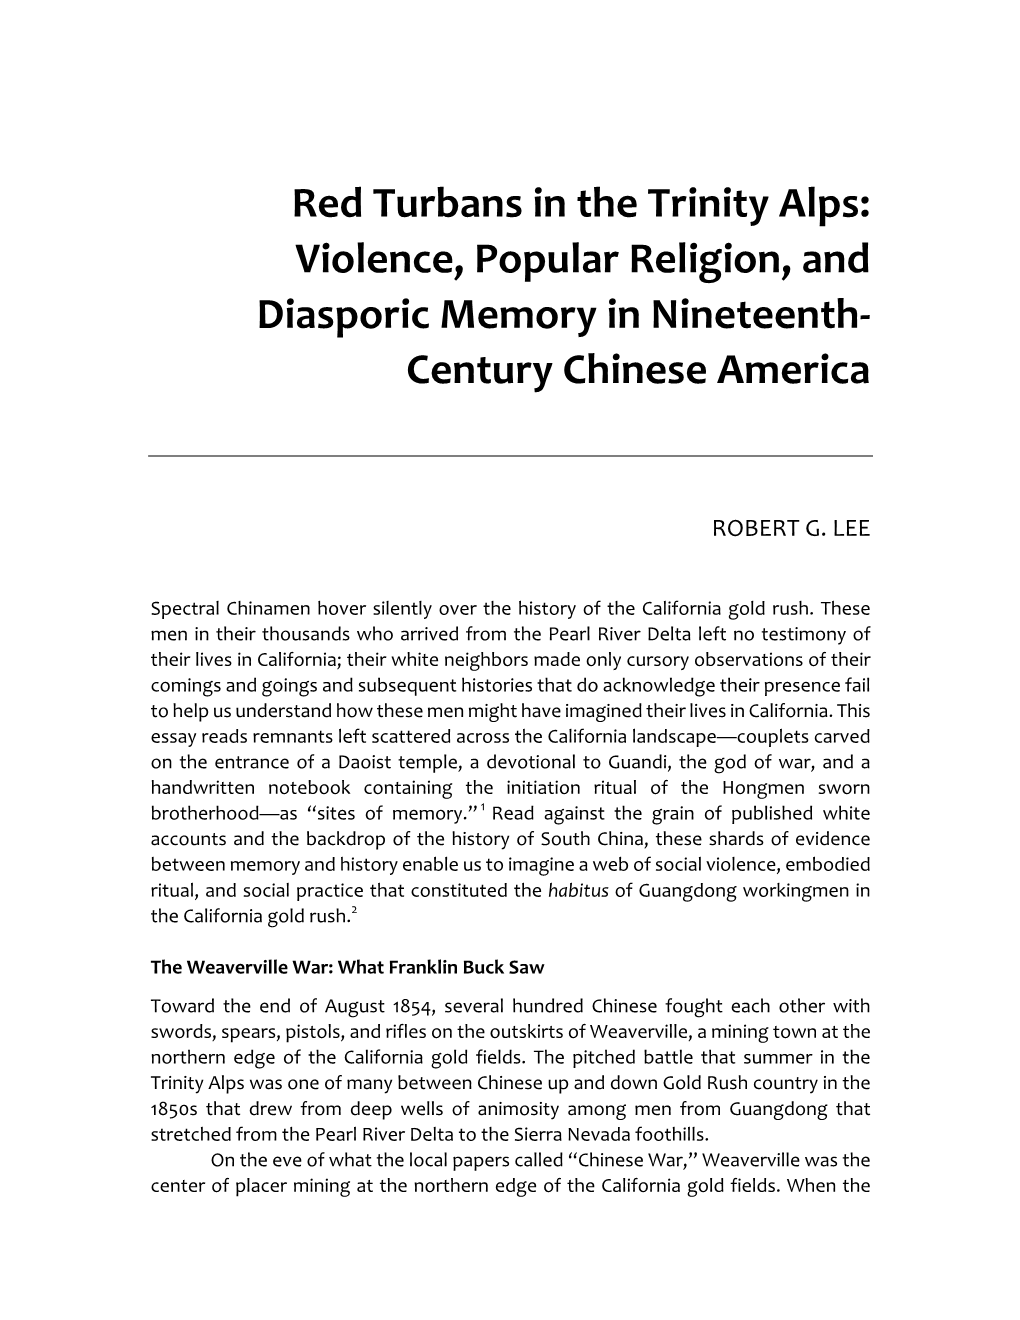 Red Turbans in the Trinity Alps: Violence, Popular Religion, and Diasporic Memory in Nineteenth- Century Chinese America